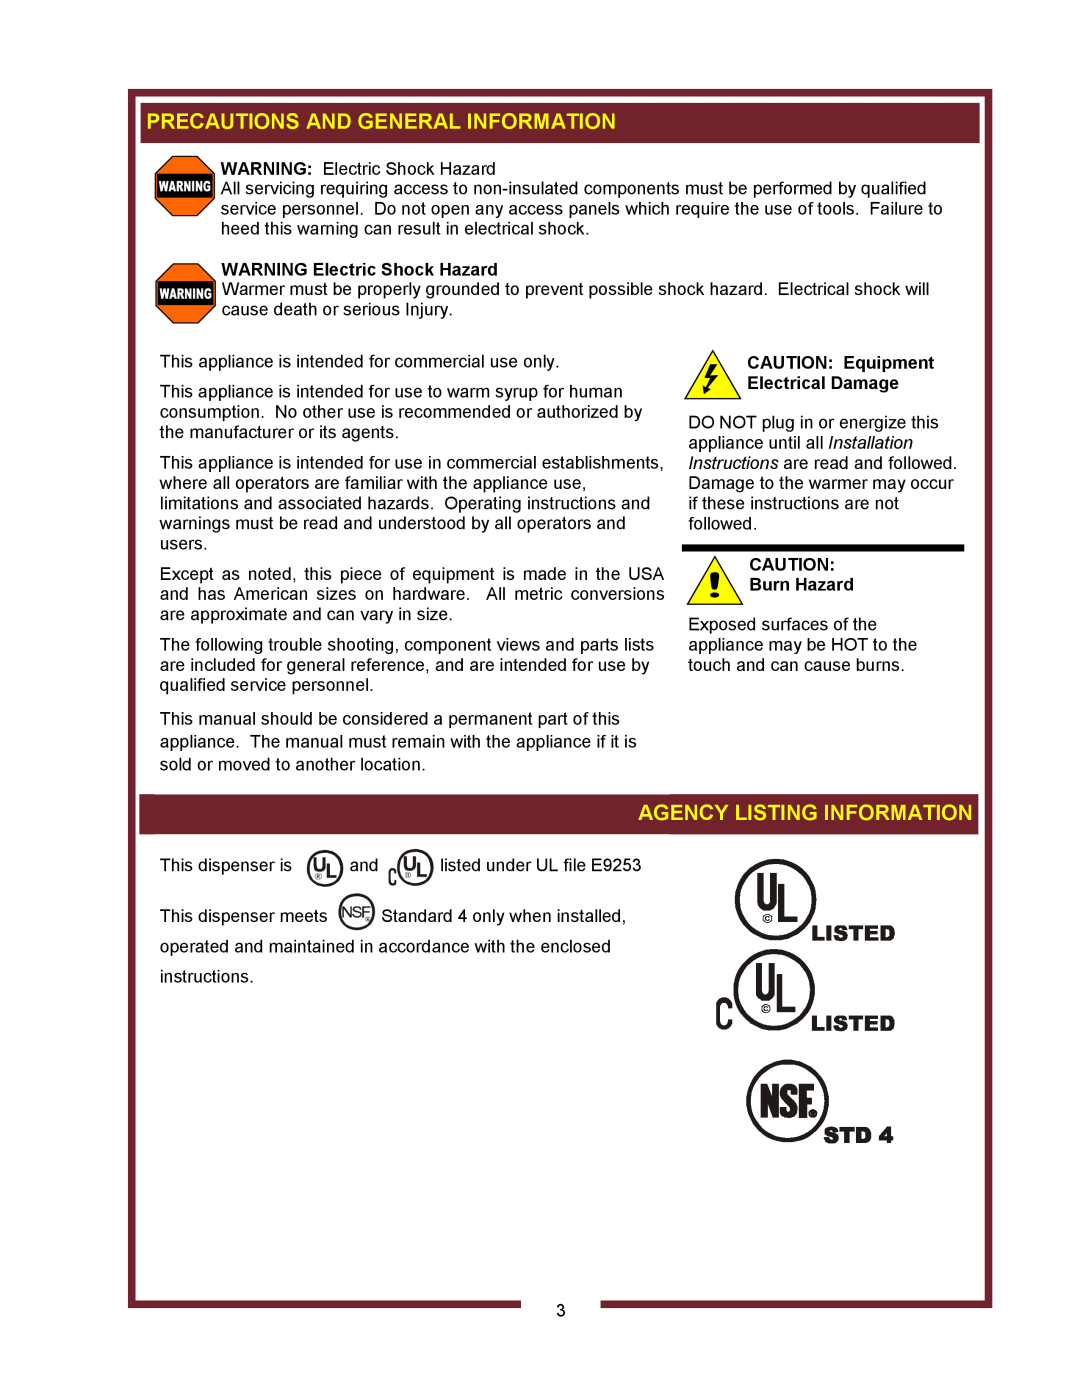 Bloomfield HD8802, HD8799 Precautions And General Information, Agency Listing Information, WARNING Electric Shock Hazard 